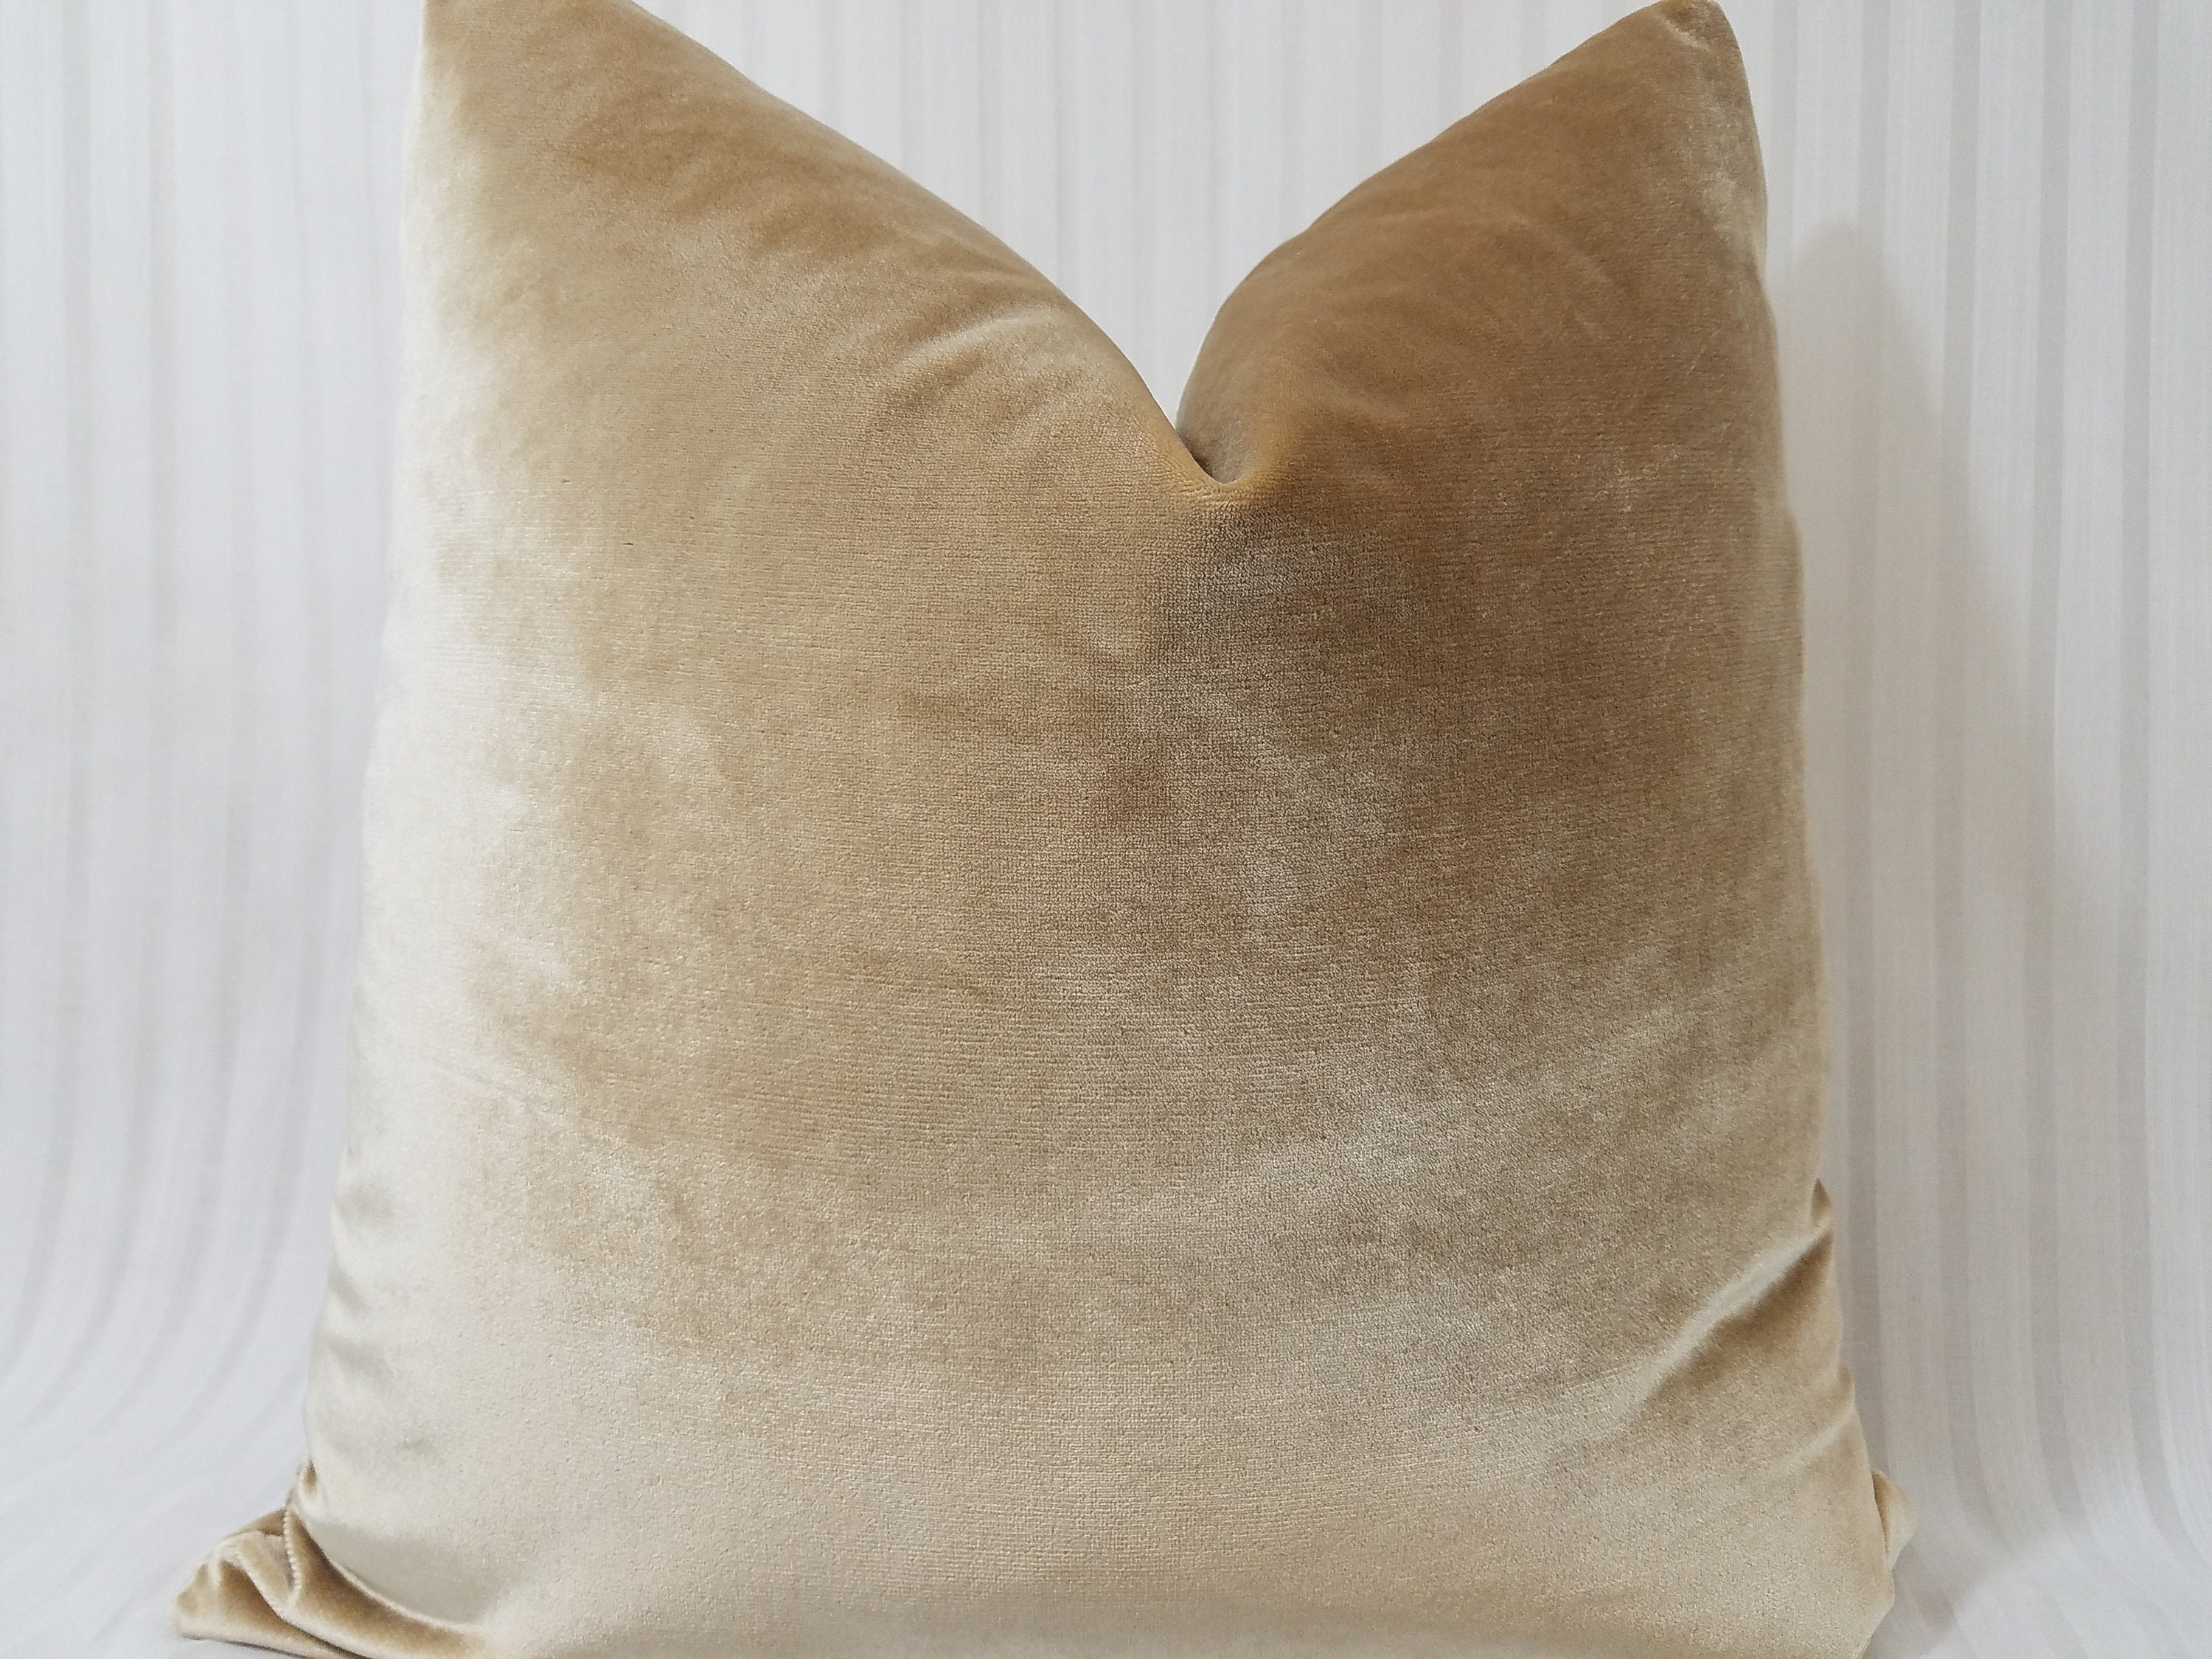 Highland Court Legacy Silk Blend Velvet Pillow Cover in Parchment - Decorative Sofa Cushion- Pale Gold Lumbar